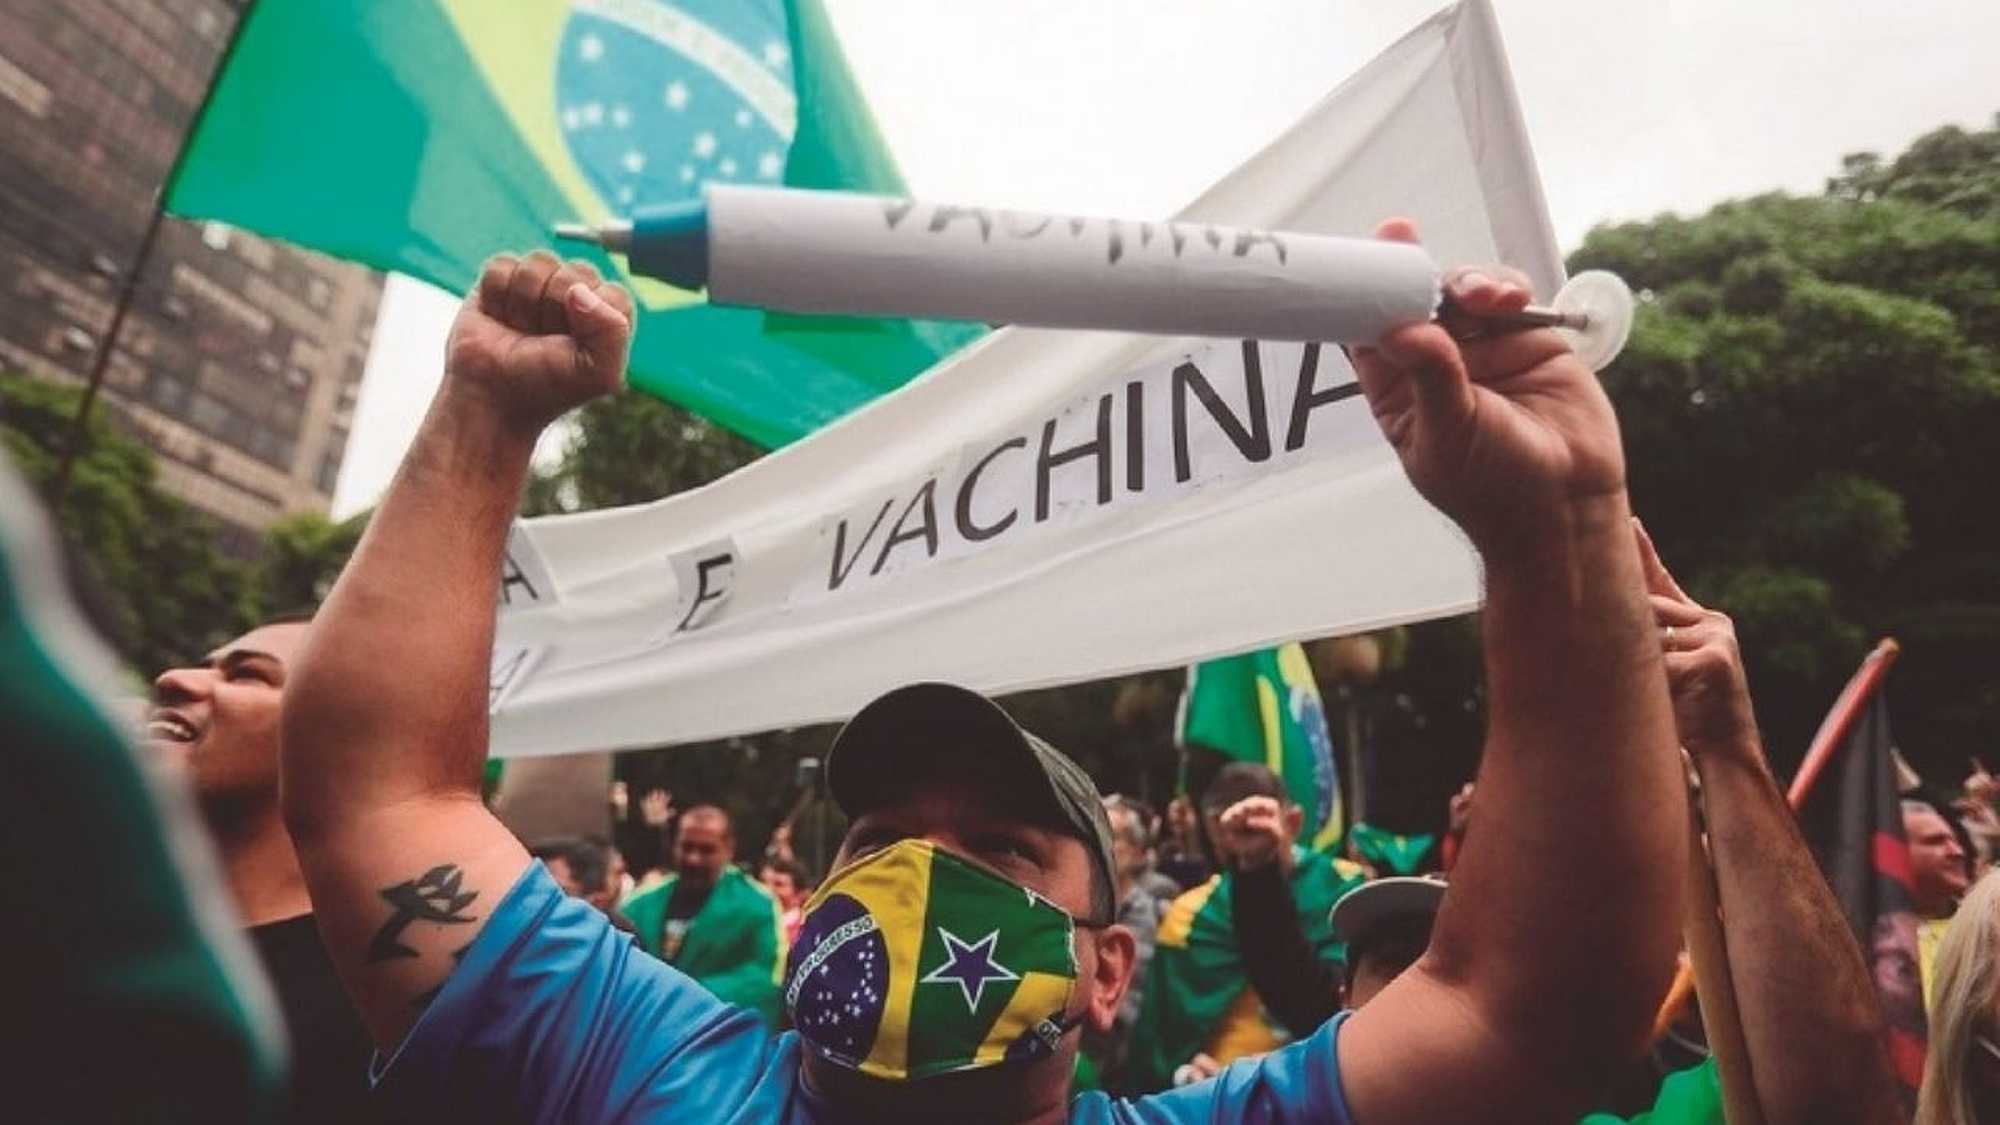 The protestors in São Paulo rallied in support of Bolsonaro, with one demonstrator holding a sign saying "We are not guinea pigs"